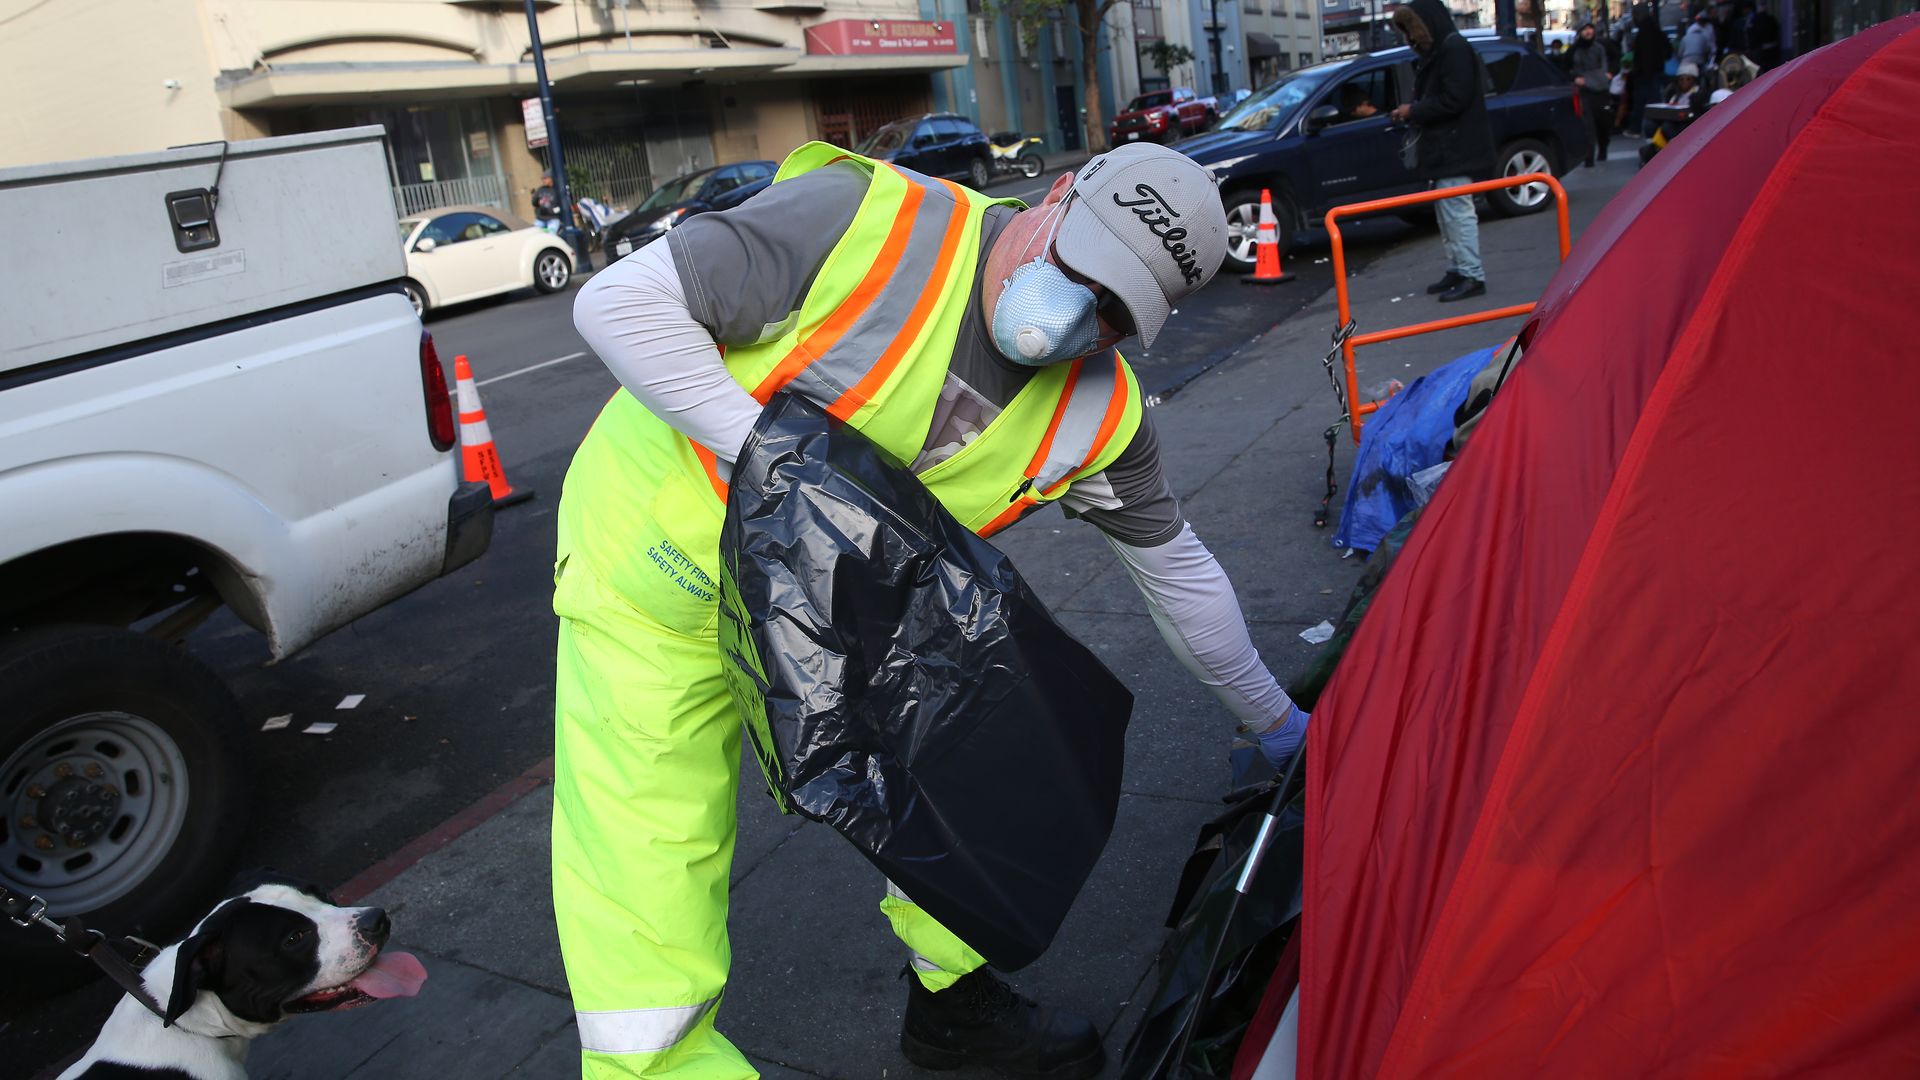  John Duport, Department of Public Works worker, hands a trash bag to someone in a tent on Hyde Street while cleaning the street and sidewalk on Wednesday, March 25, 2020 in San Francisco, Calif. 